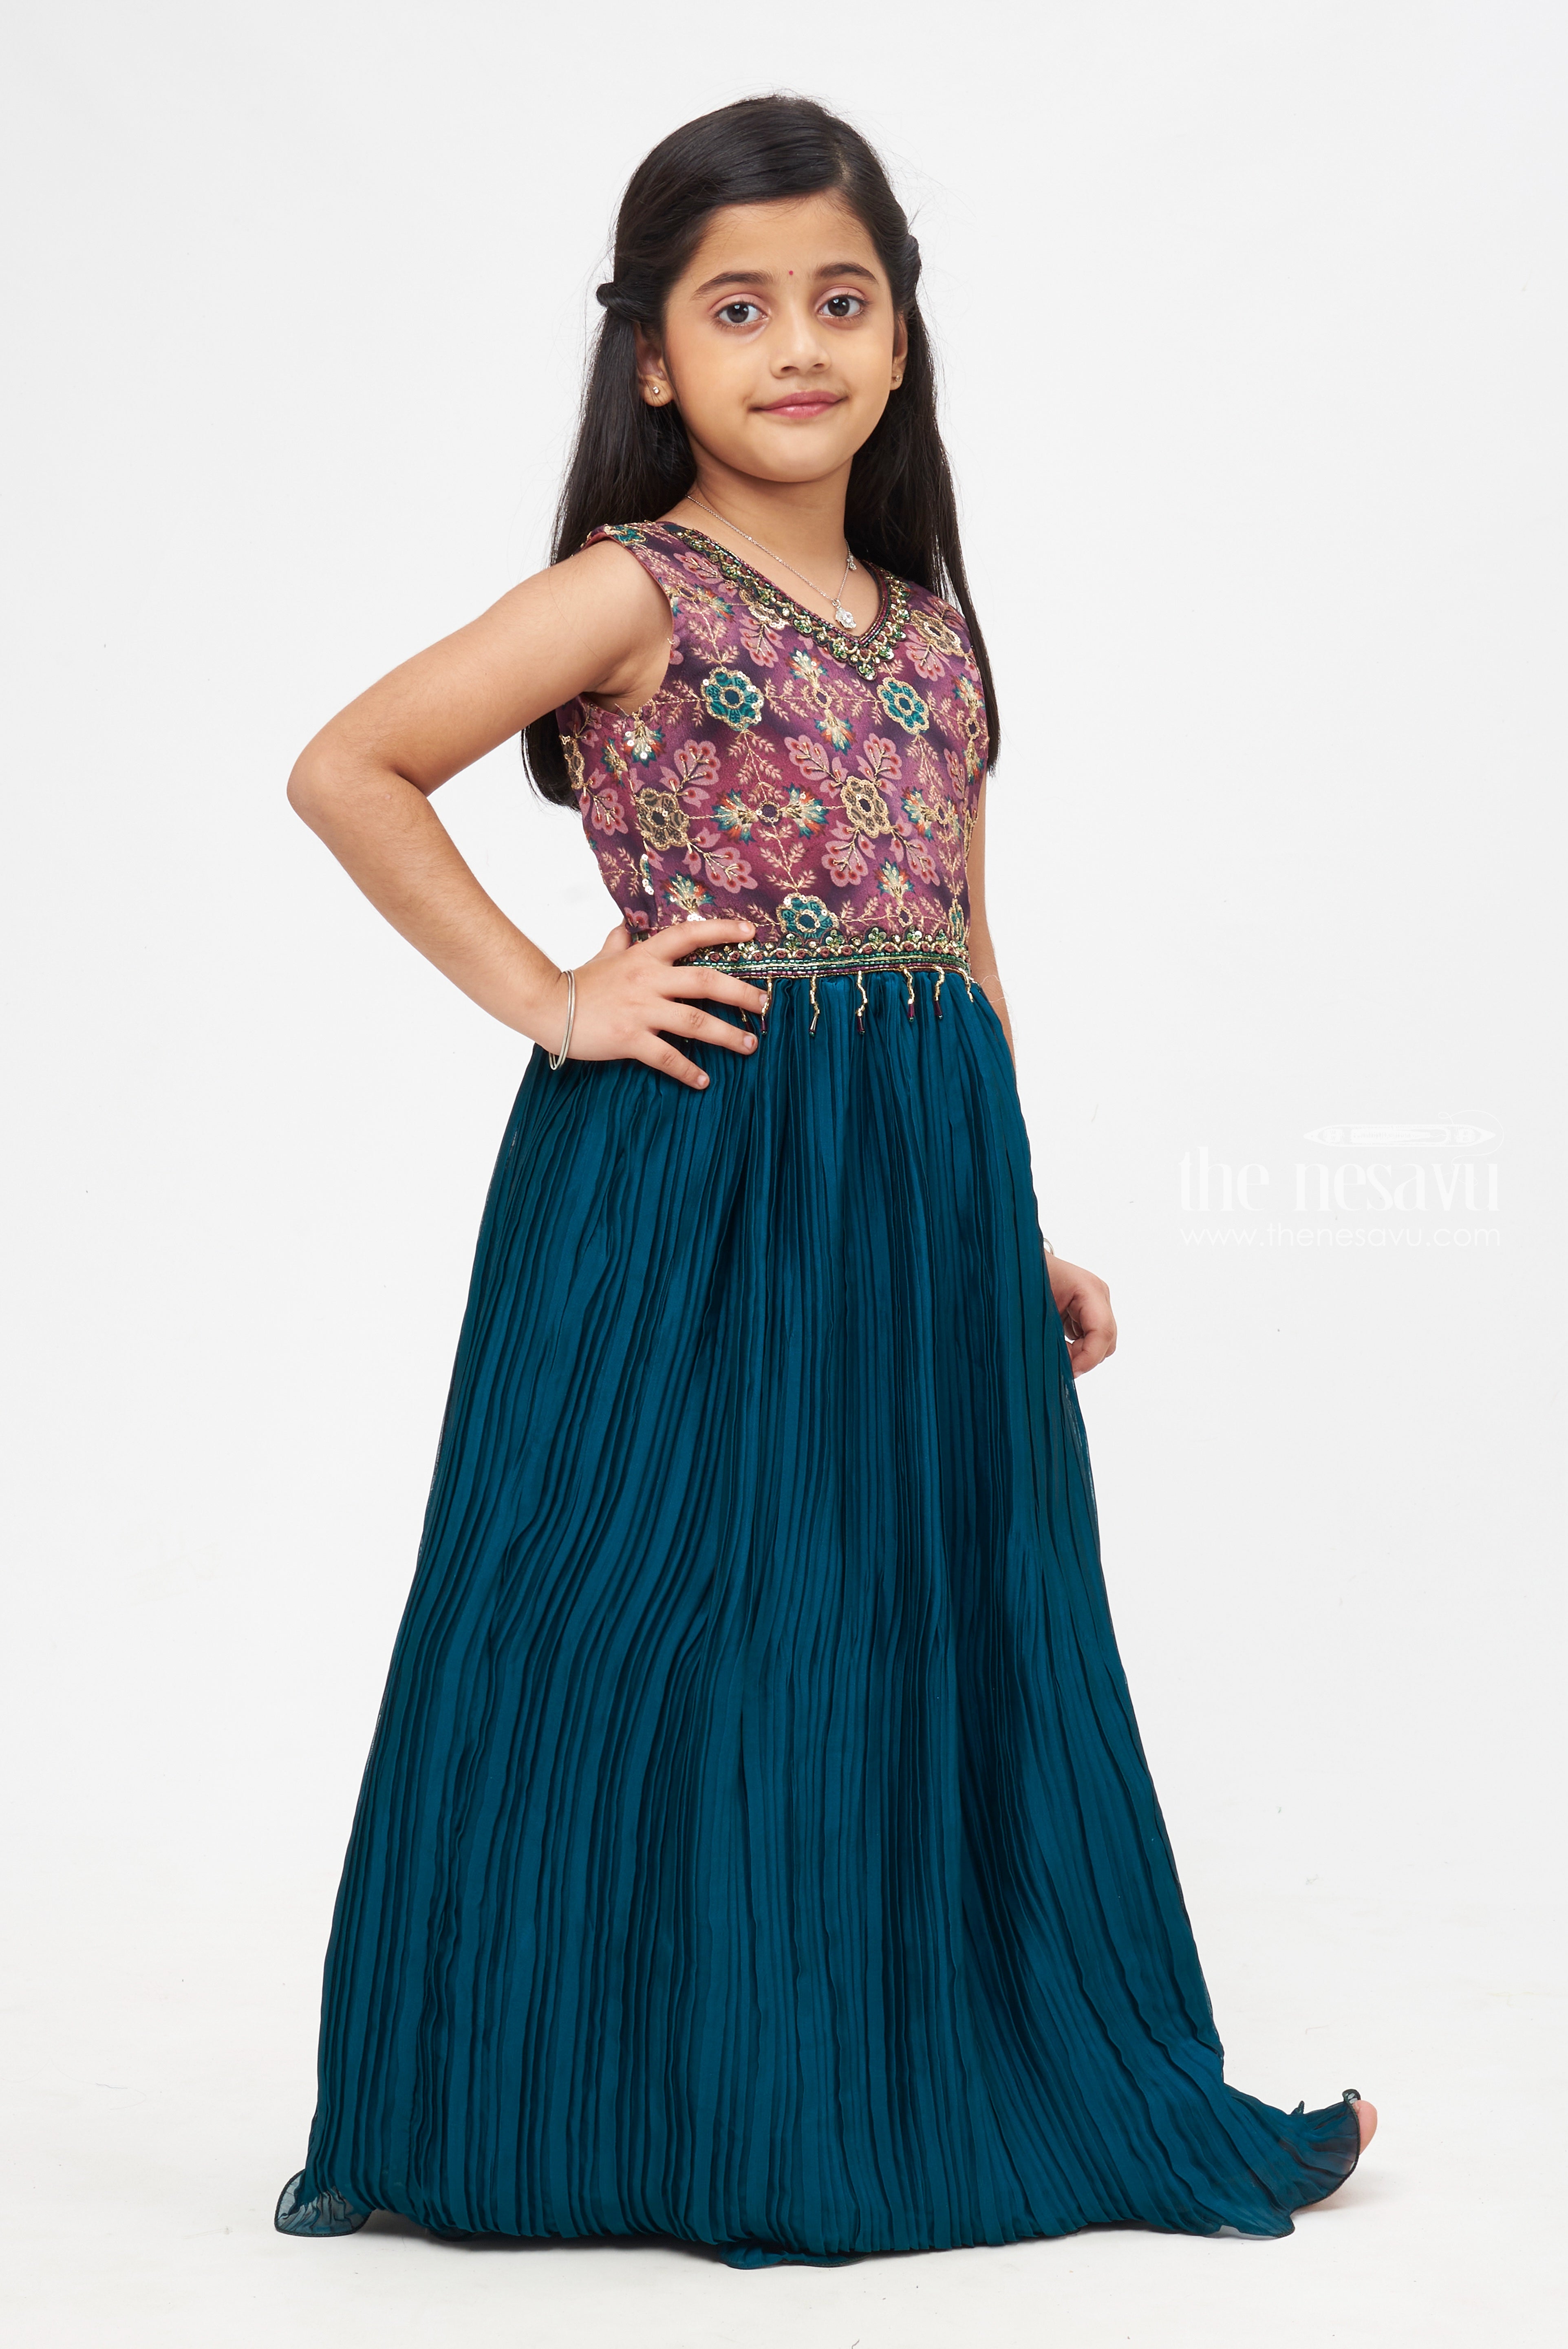 Zadmus Girls Printed Stylish Gown Dress (Blue,6 - 7 Years) - Buy Zadmus  Girls Printed Stylish Gown Dress (Blue,6 - 7 Years) Online at Low Price -  Snapdeal